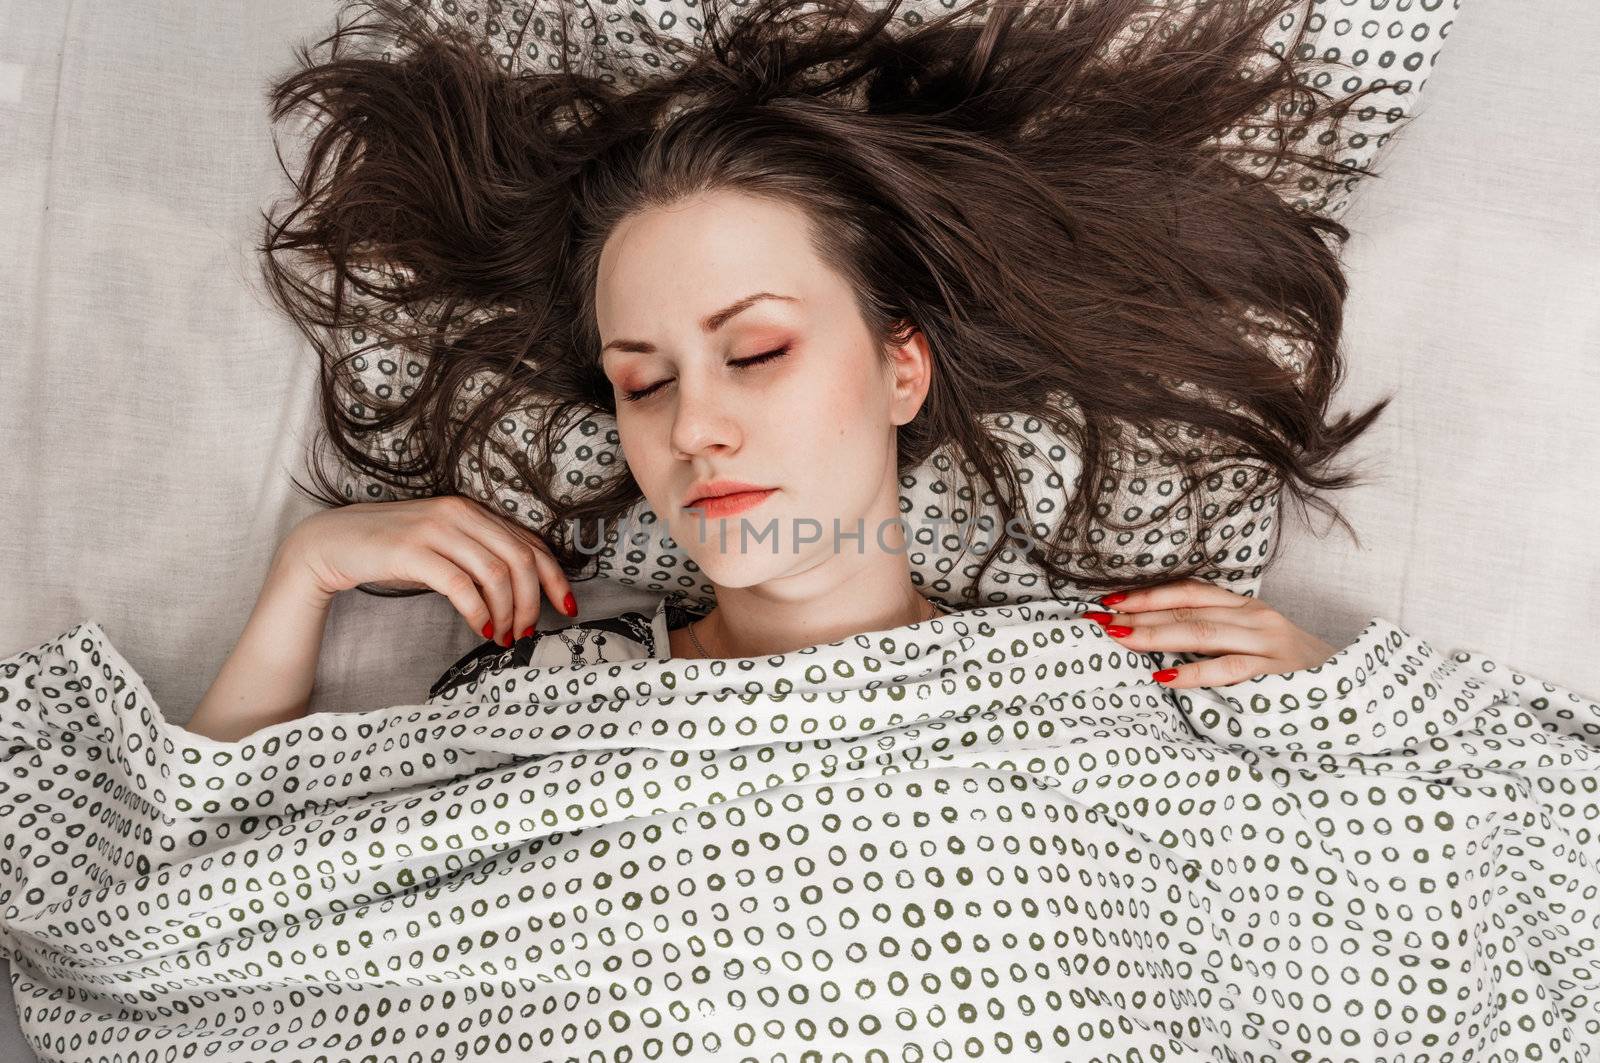 Young woman in the bed in bright light